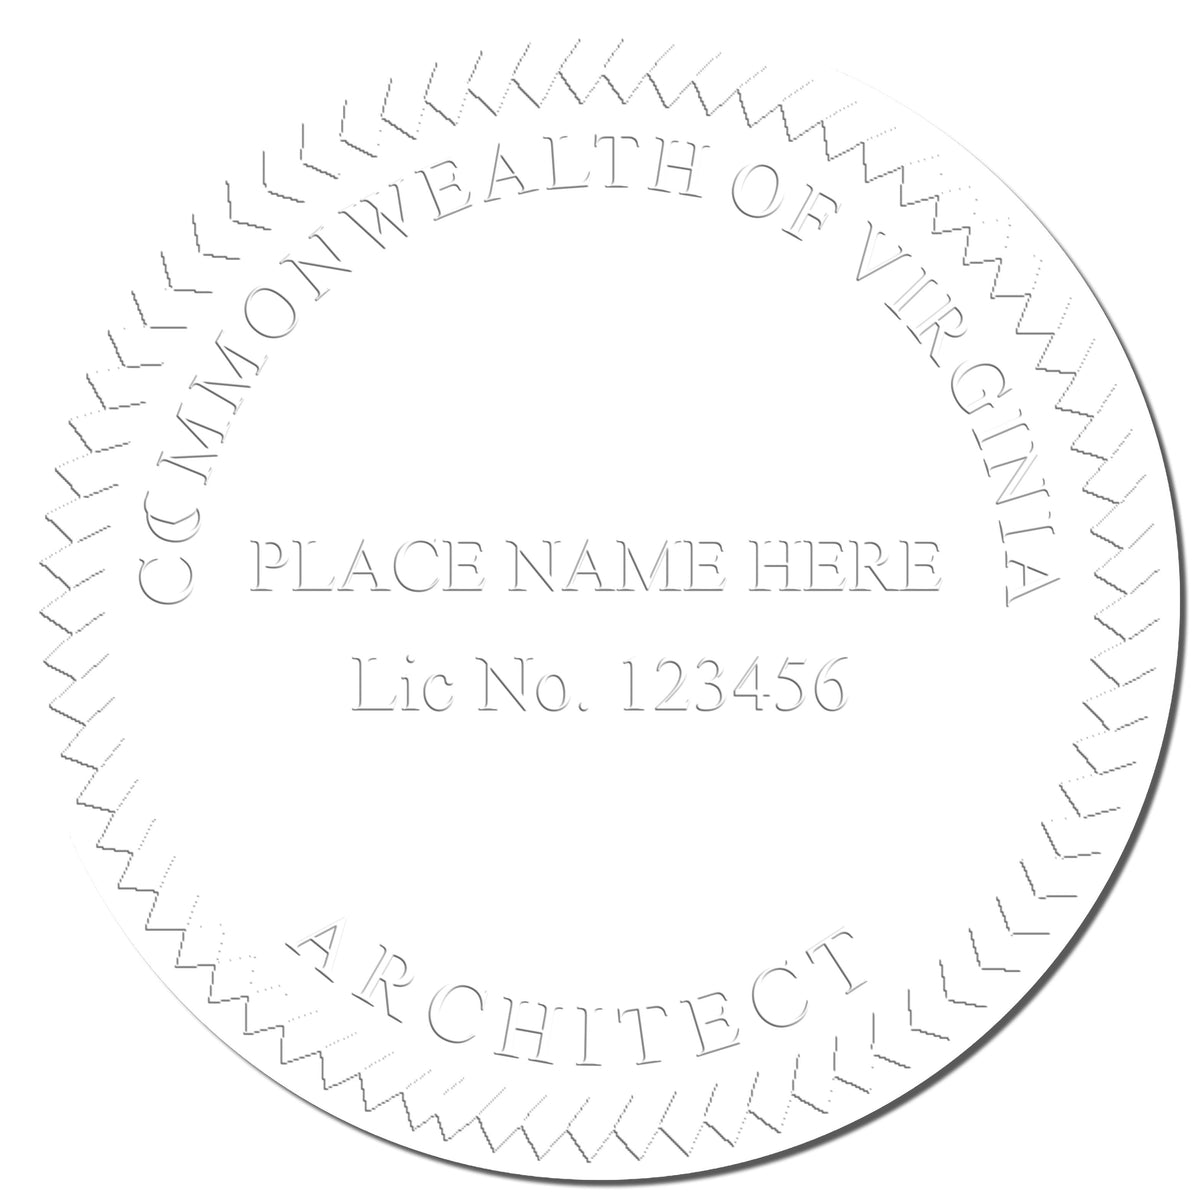 This paper is stamped with a sample imprint of the Gift Virginia Architect Seal, signifying its quality and reliability.